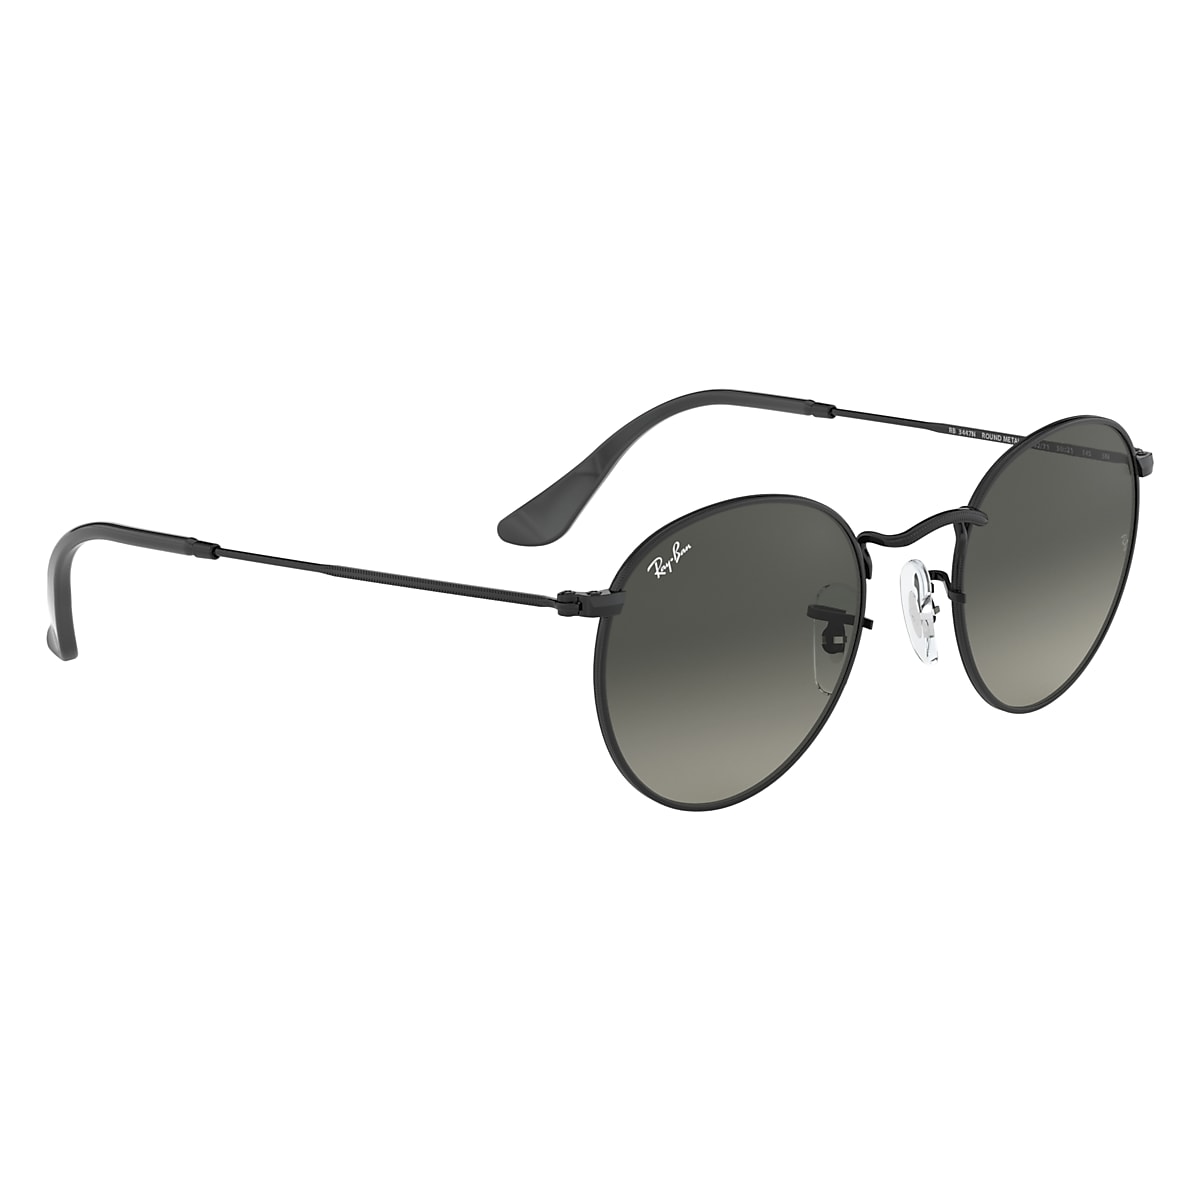 US - Sunglasses and Black | Ray-Ban® in LENSES RB3447N Grey ROUND FLAT